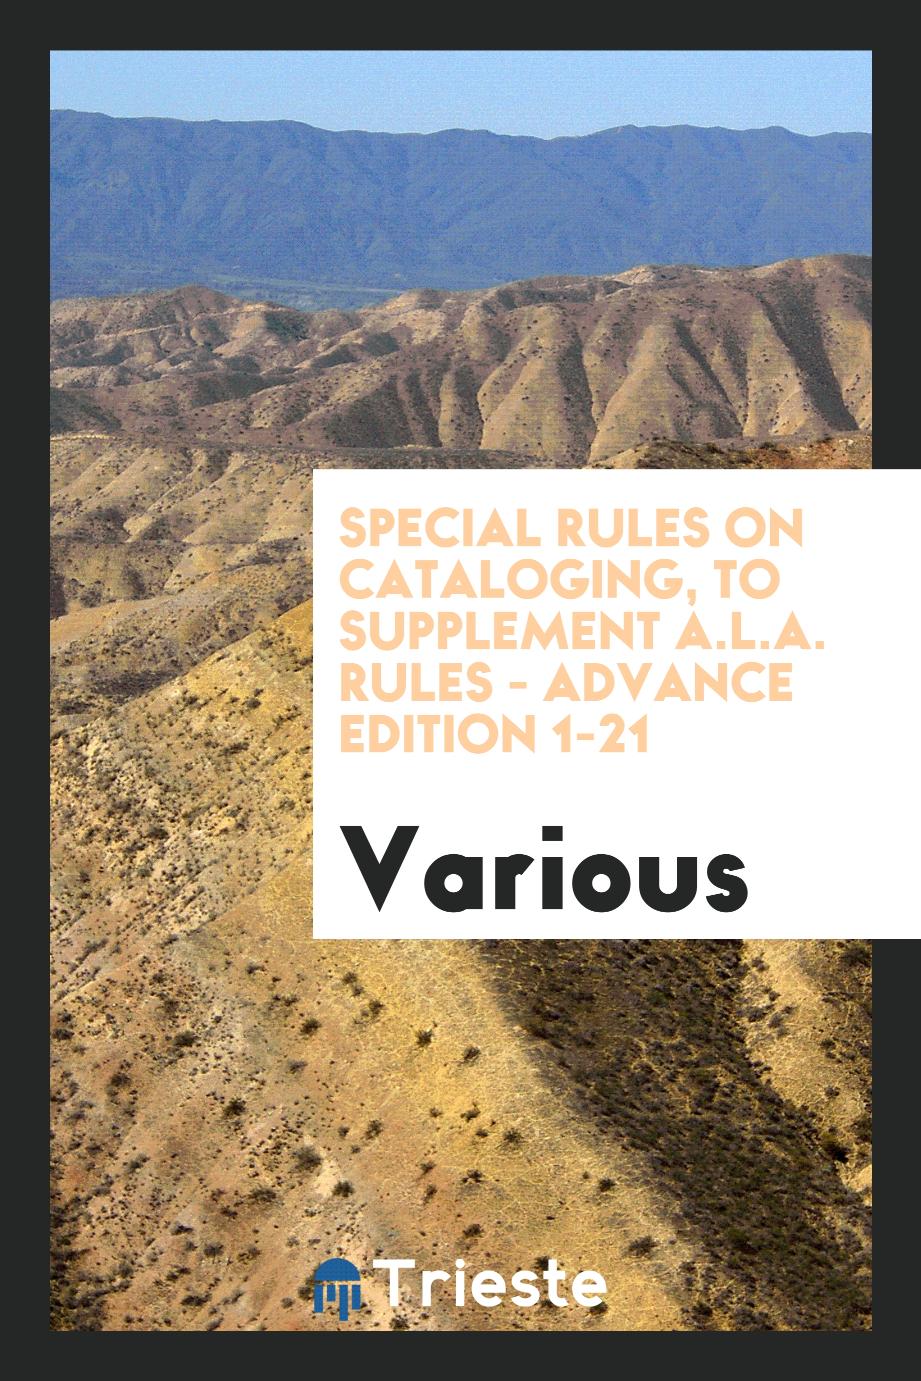 Special rules on cataloging, to supplement A.L.A. rules - Advance edition 1-21